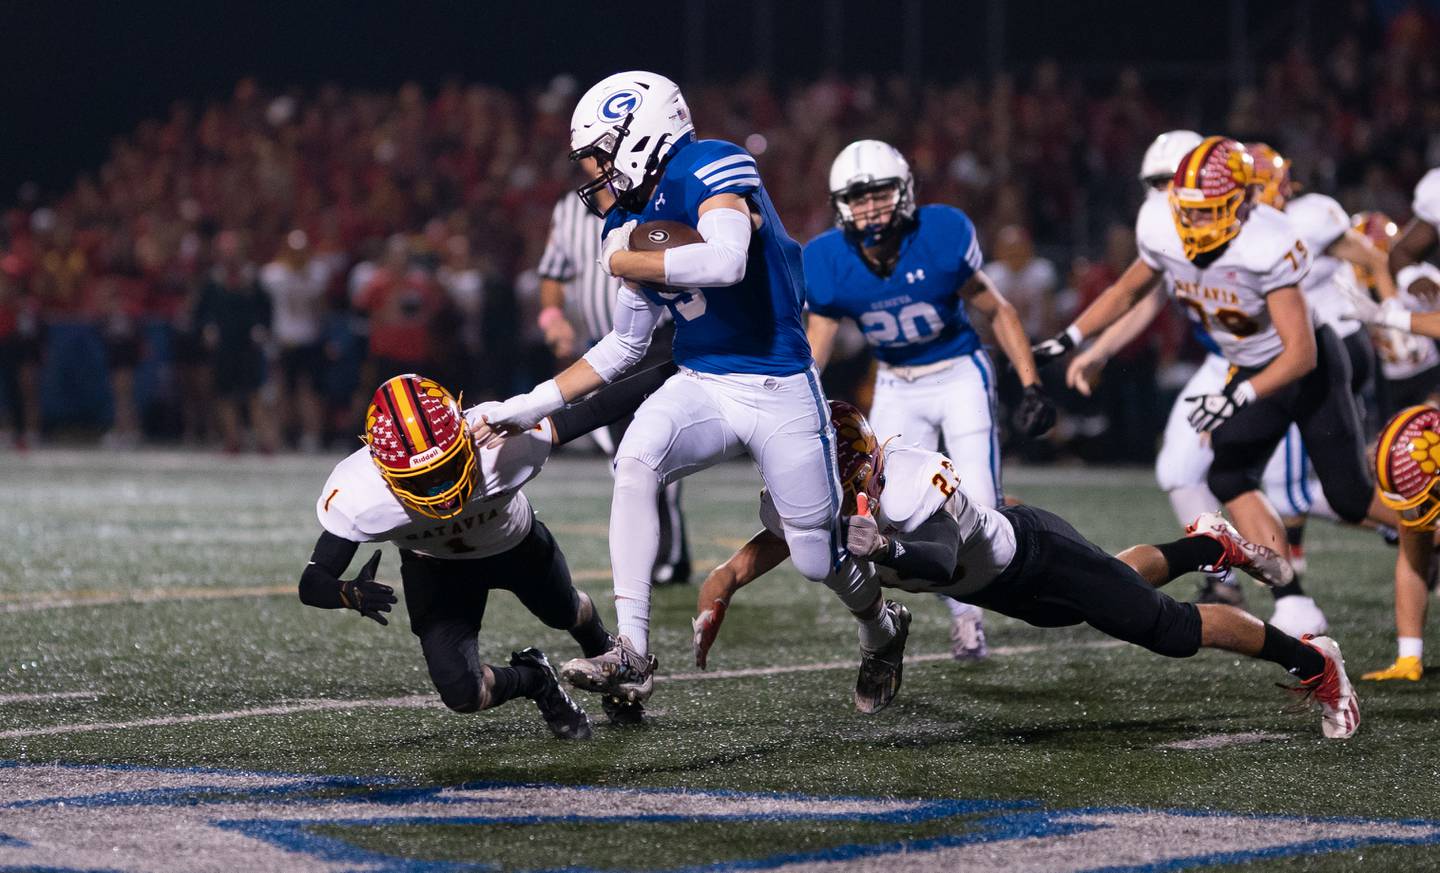 Geneva’s Carter Powelson (5) carries the ball against Batavia's Anthony Roberts (1) during a varsity football game at Geneva High School in Geneva on Friday, Oct 8, 2021.